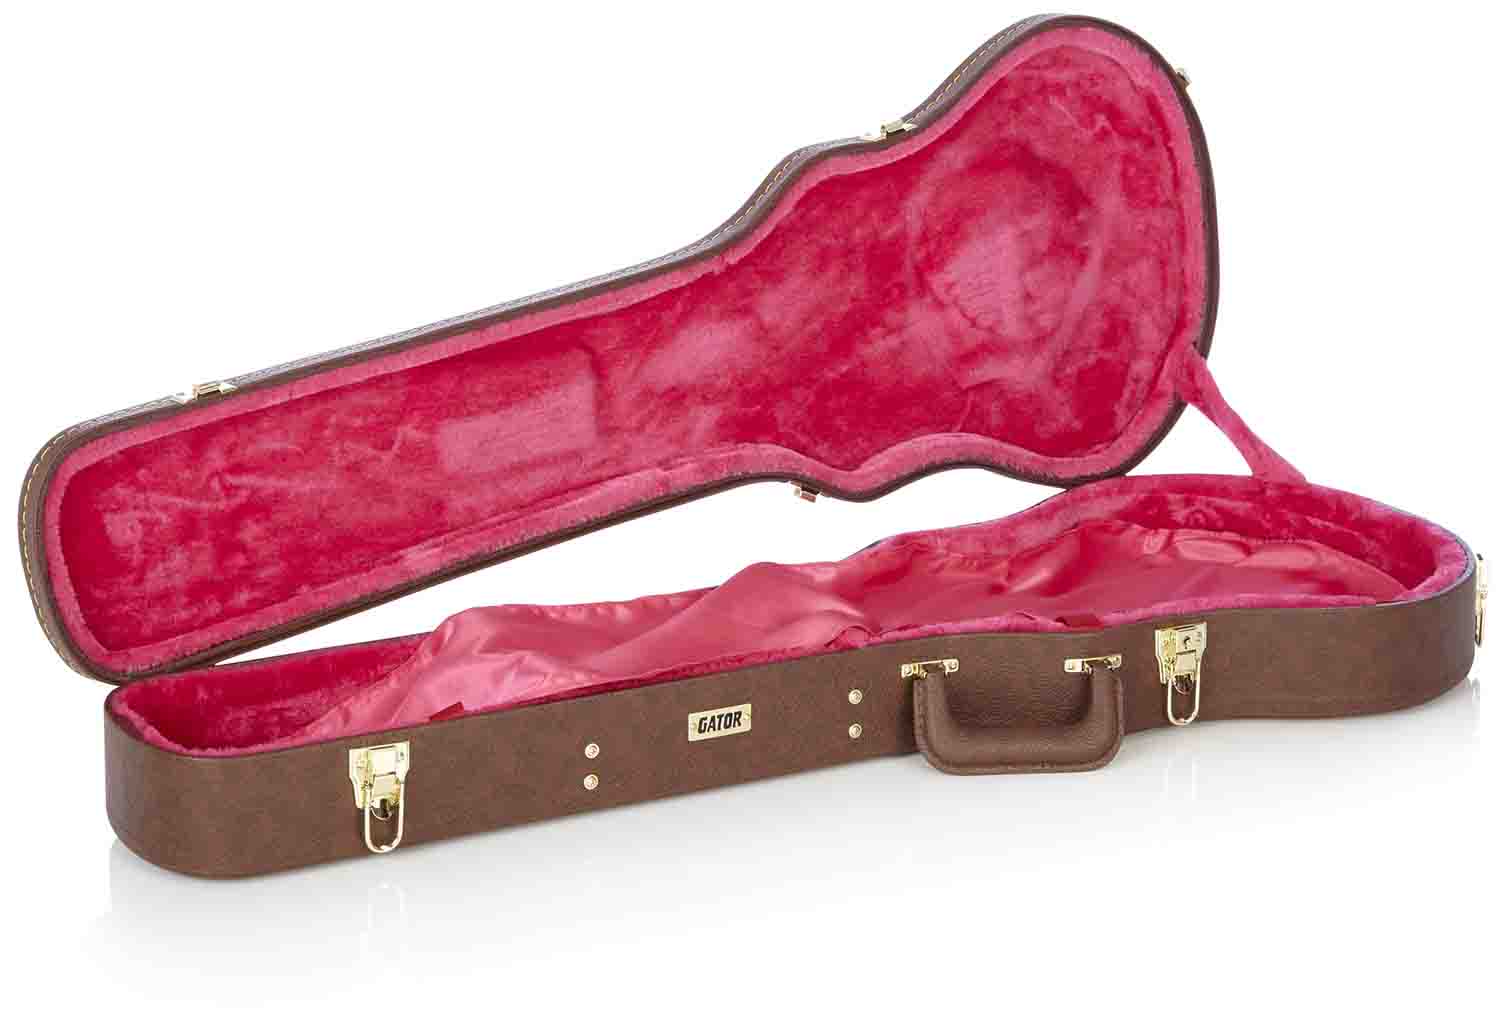 Gator Cases GW-LP-BROWN Deluxe Wood Case for Single-Cutaway Guitars - Vintage Brown Exterior - Hollywood DJ